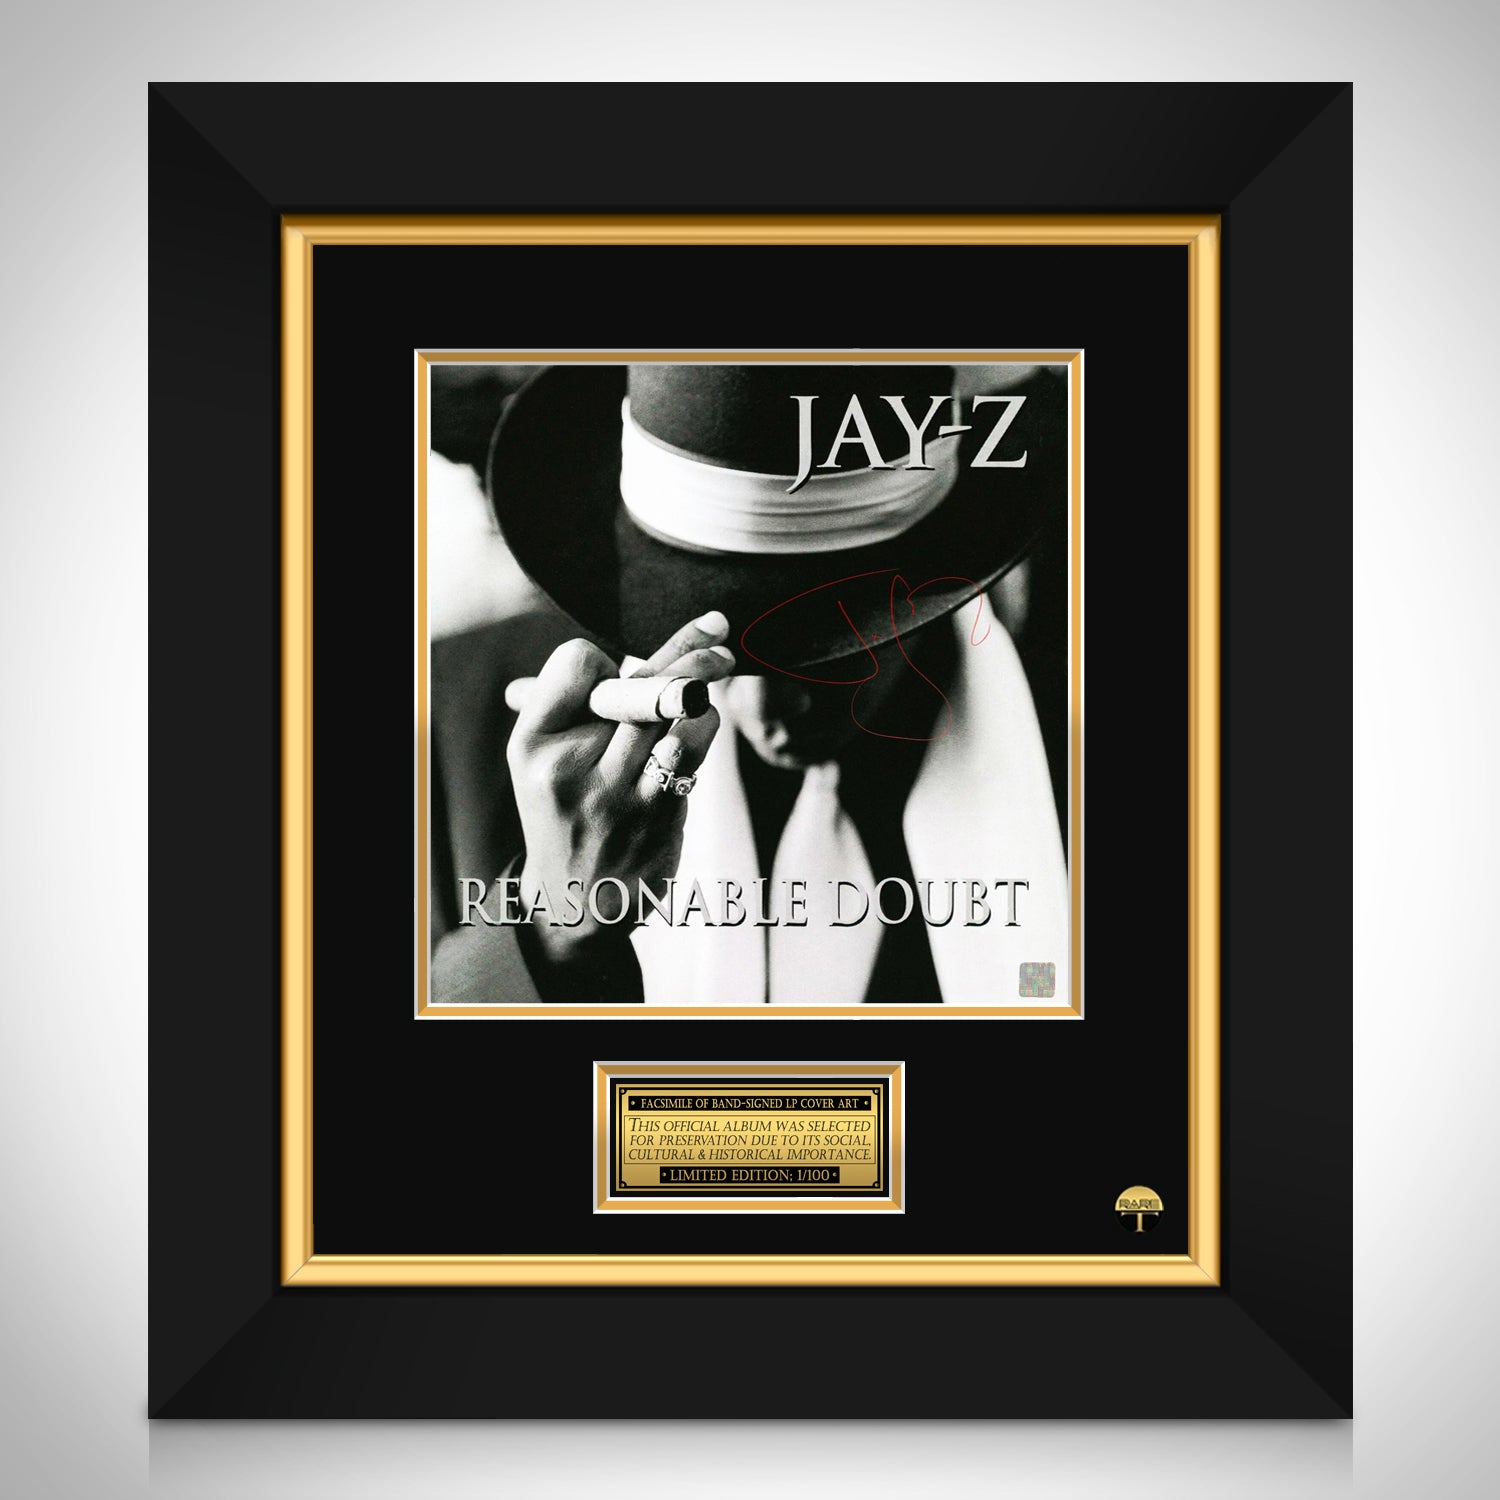 Jay-Z - Reasonable Doubt LP Cover Limited Signature Edition 